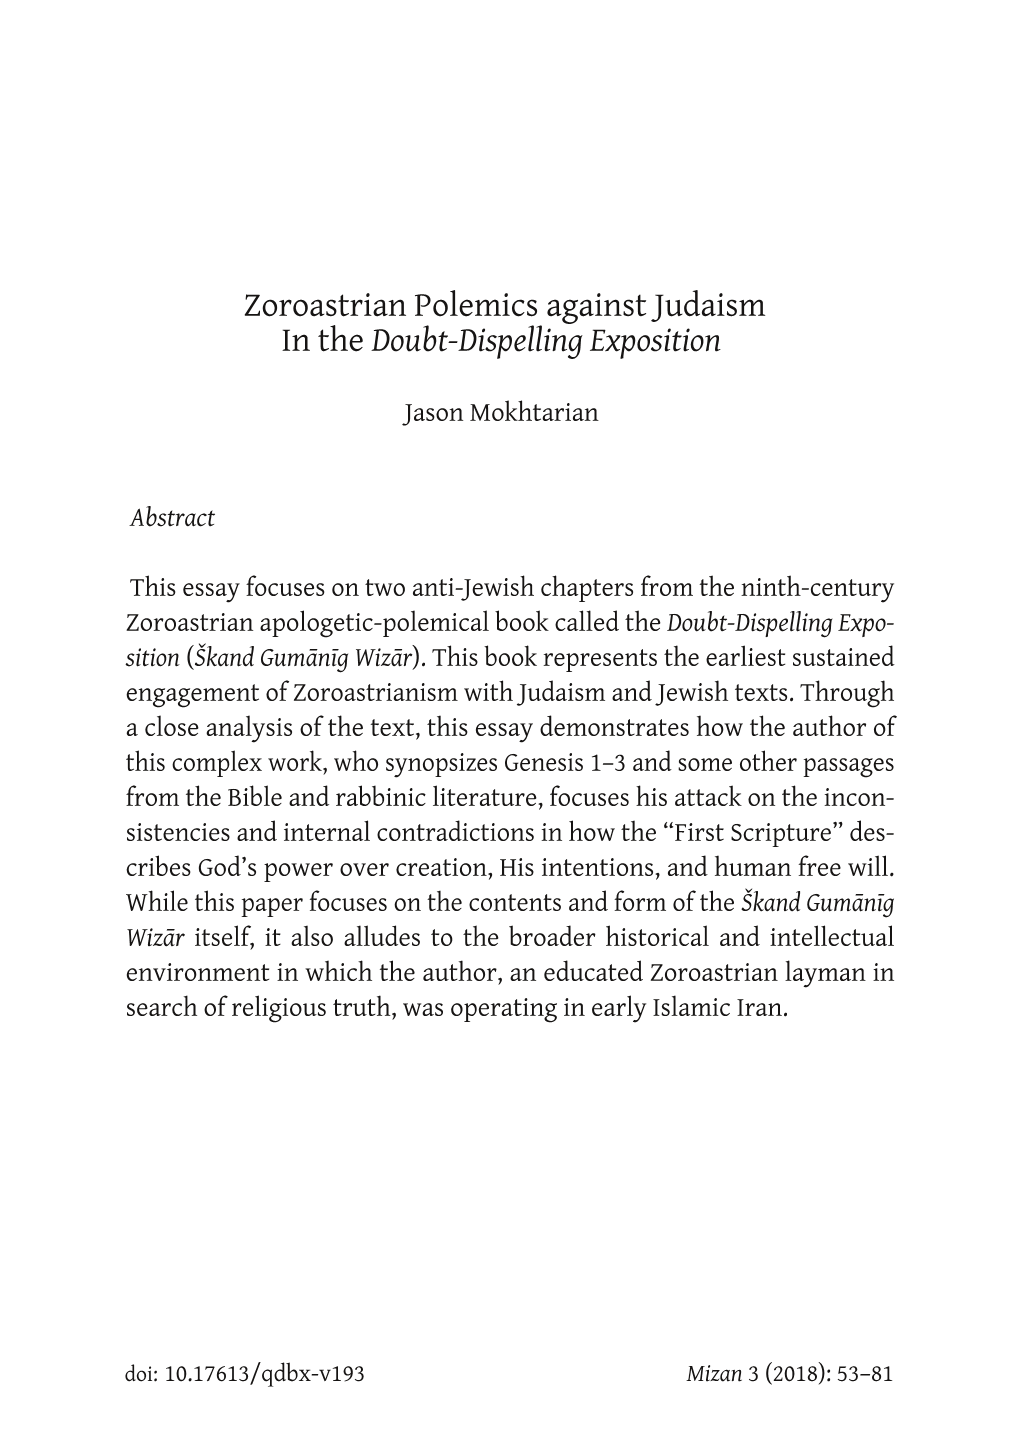 Zoroastrian Polemics Against Judaism in the Doubt-Dispelling Exposition